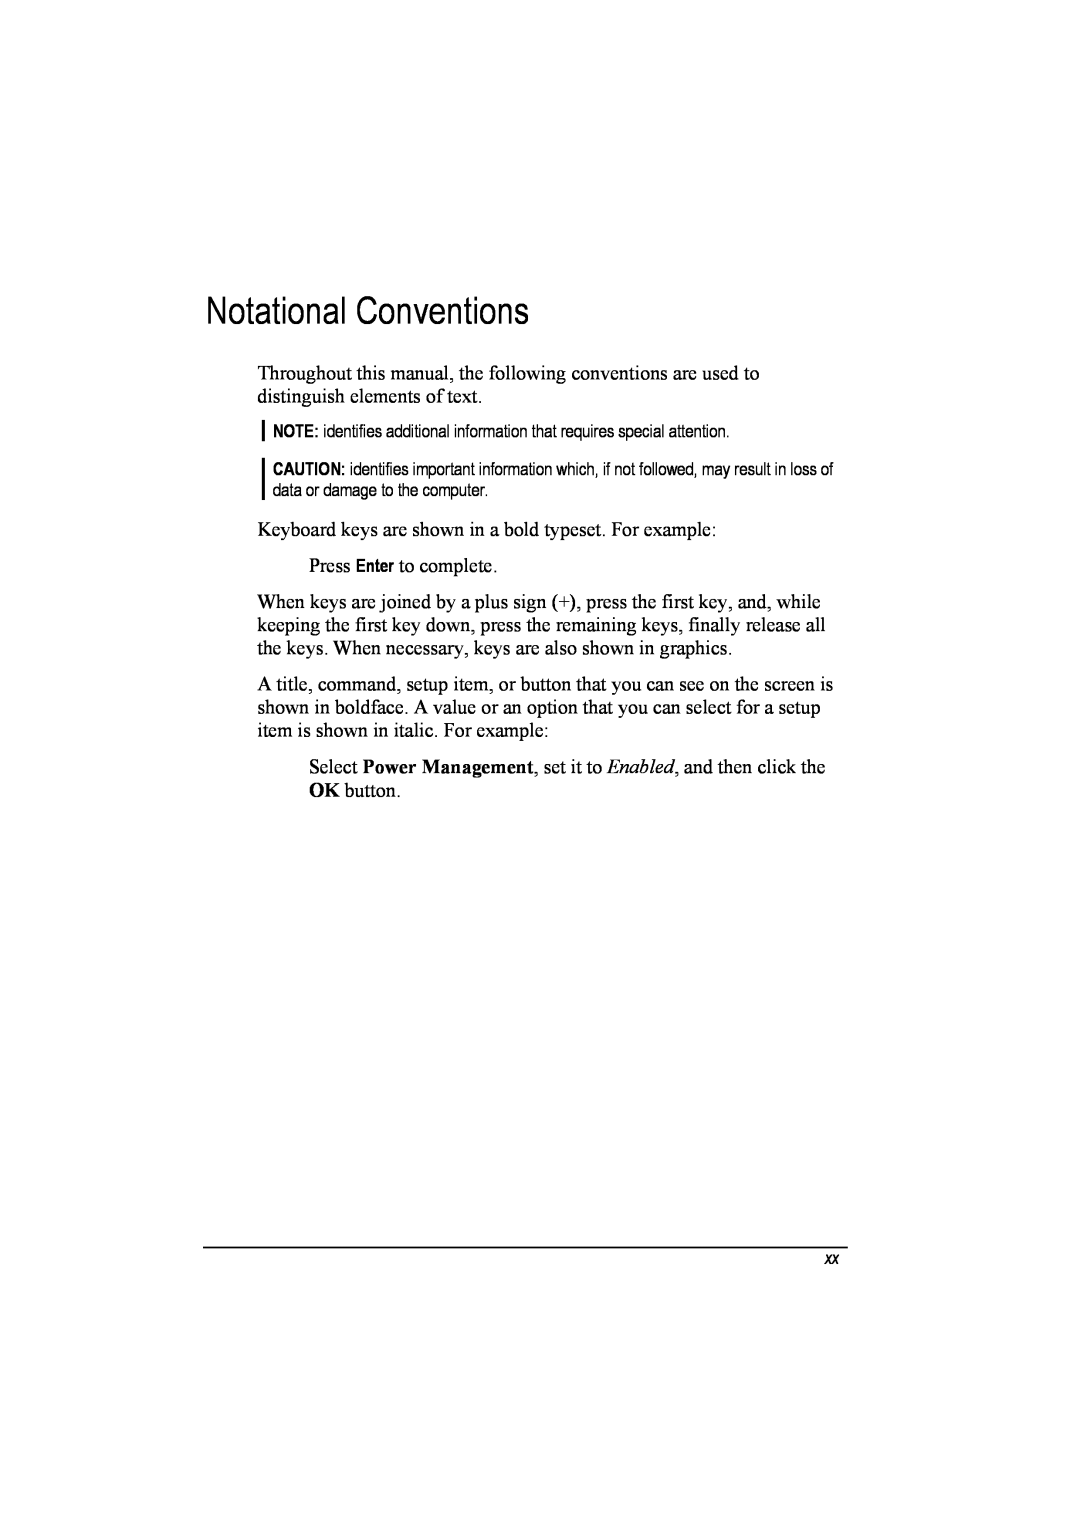 TAG 20 Series manual Notational Conventions 